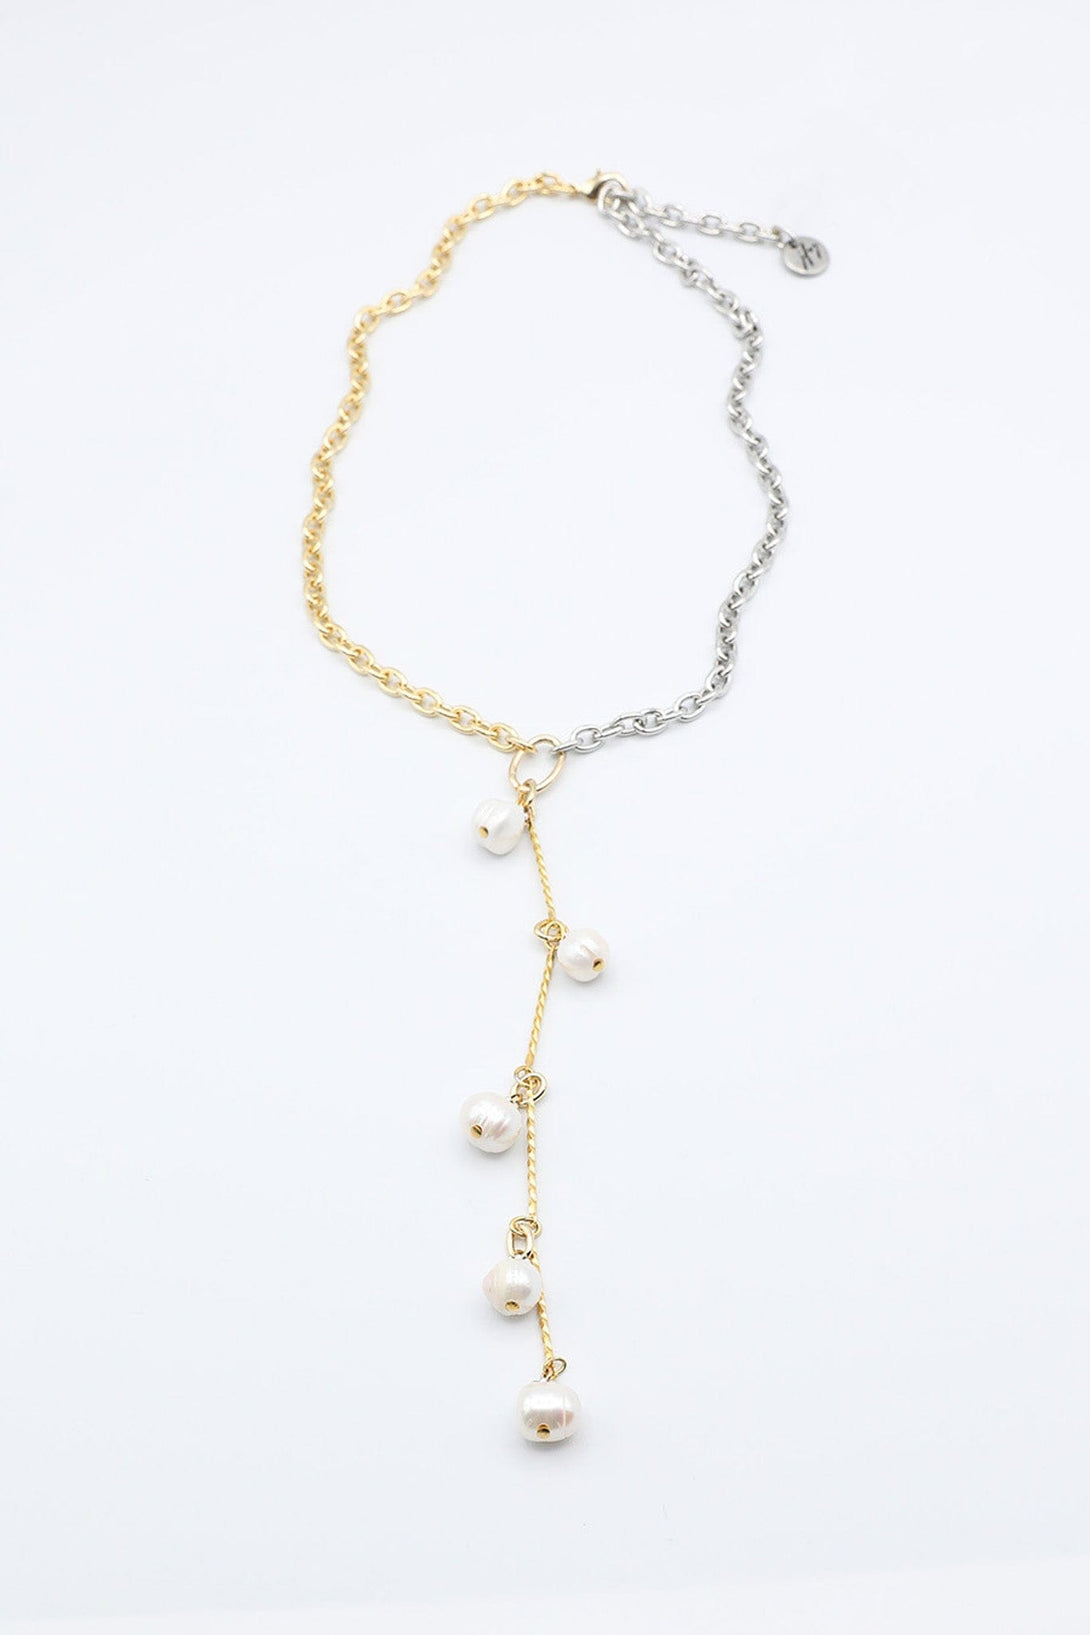 Necklace with Drop Featuring Five Freshwater Pearls